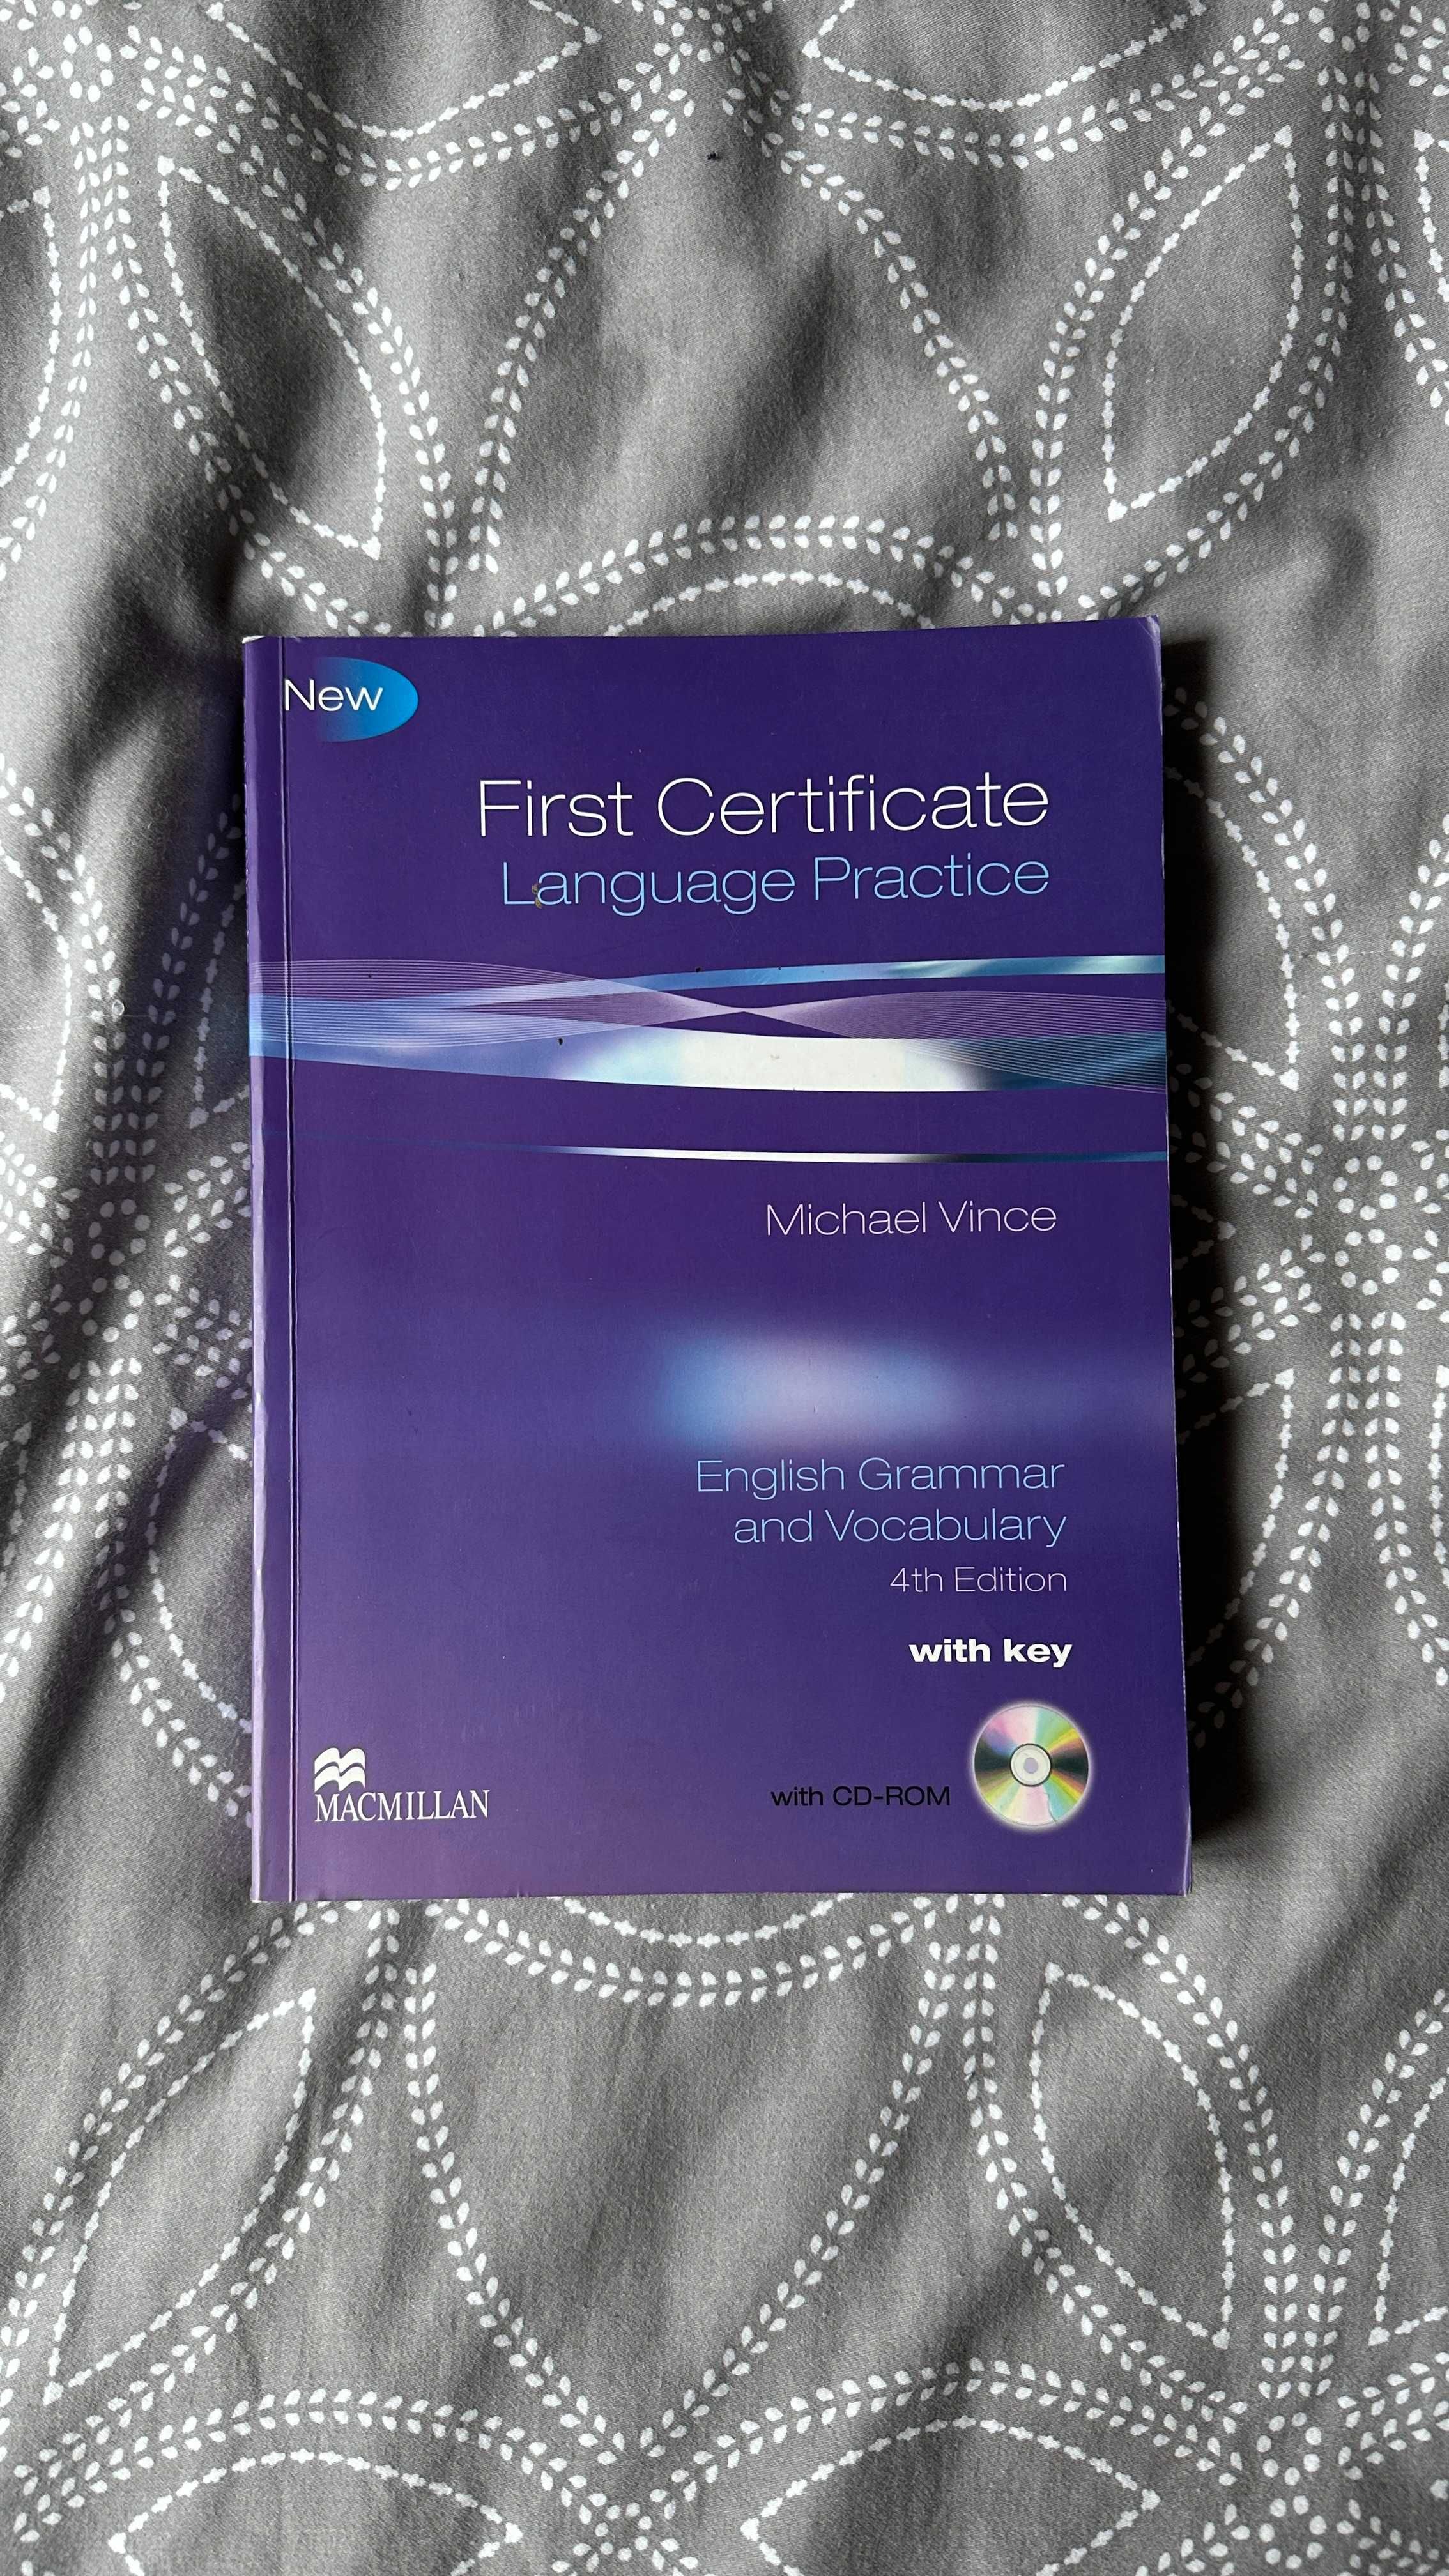 First Certificate Language Practice | Michael Vince | 4th Edition | CD